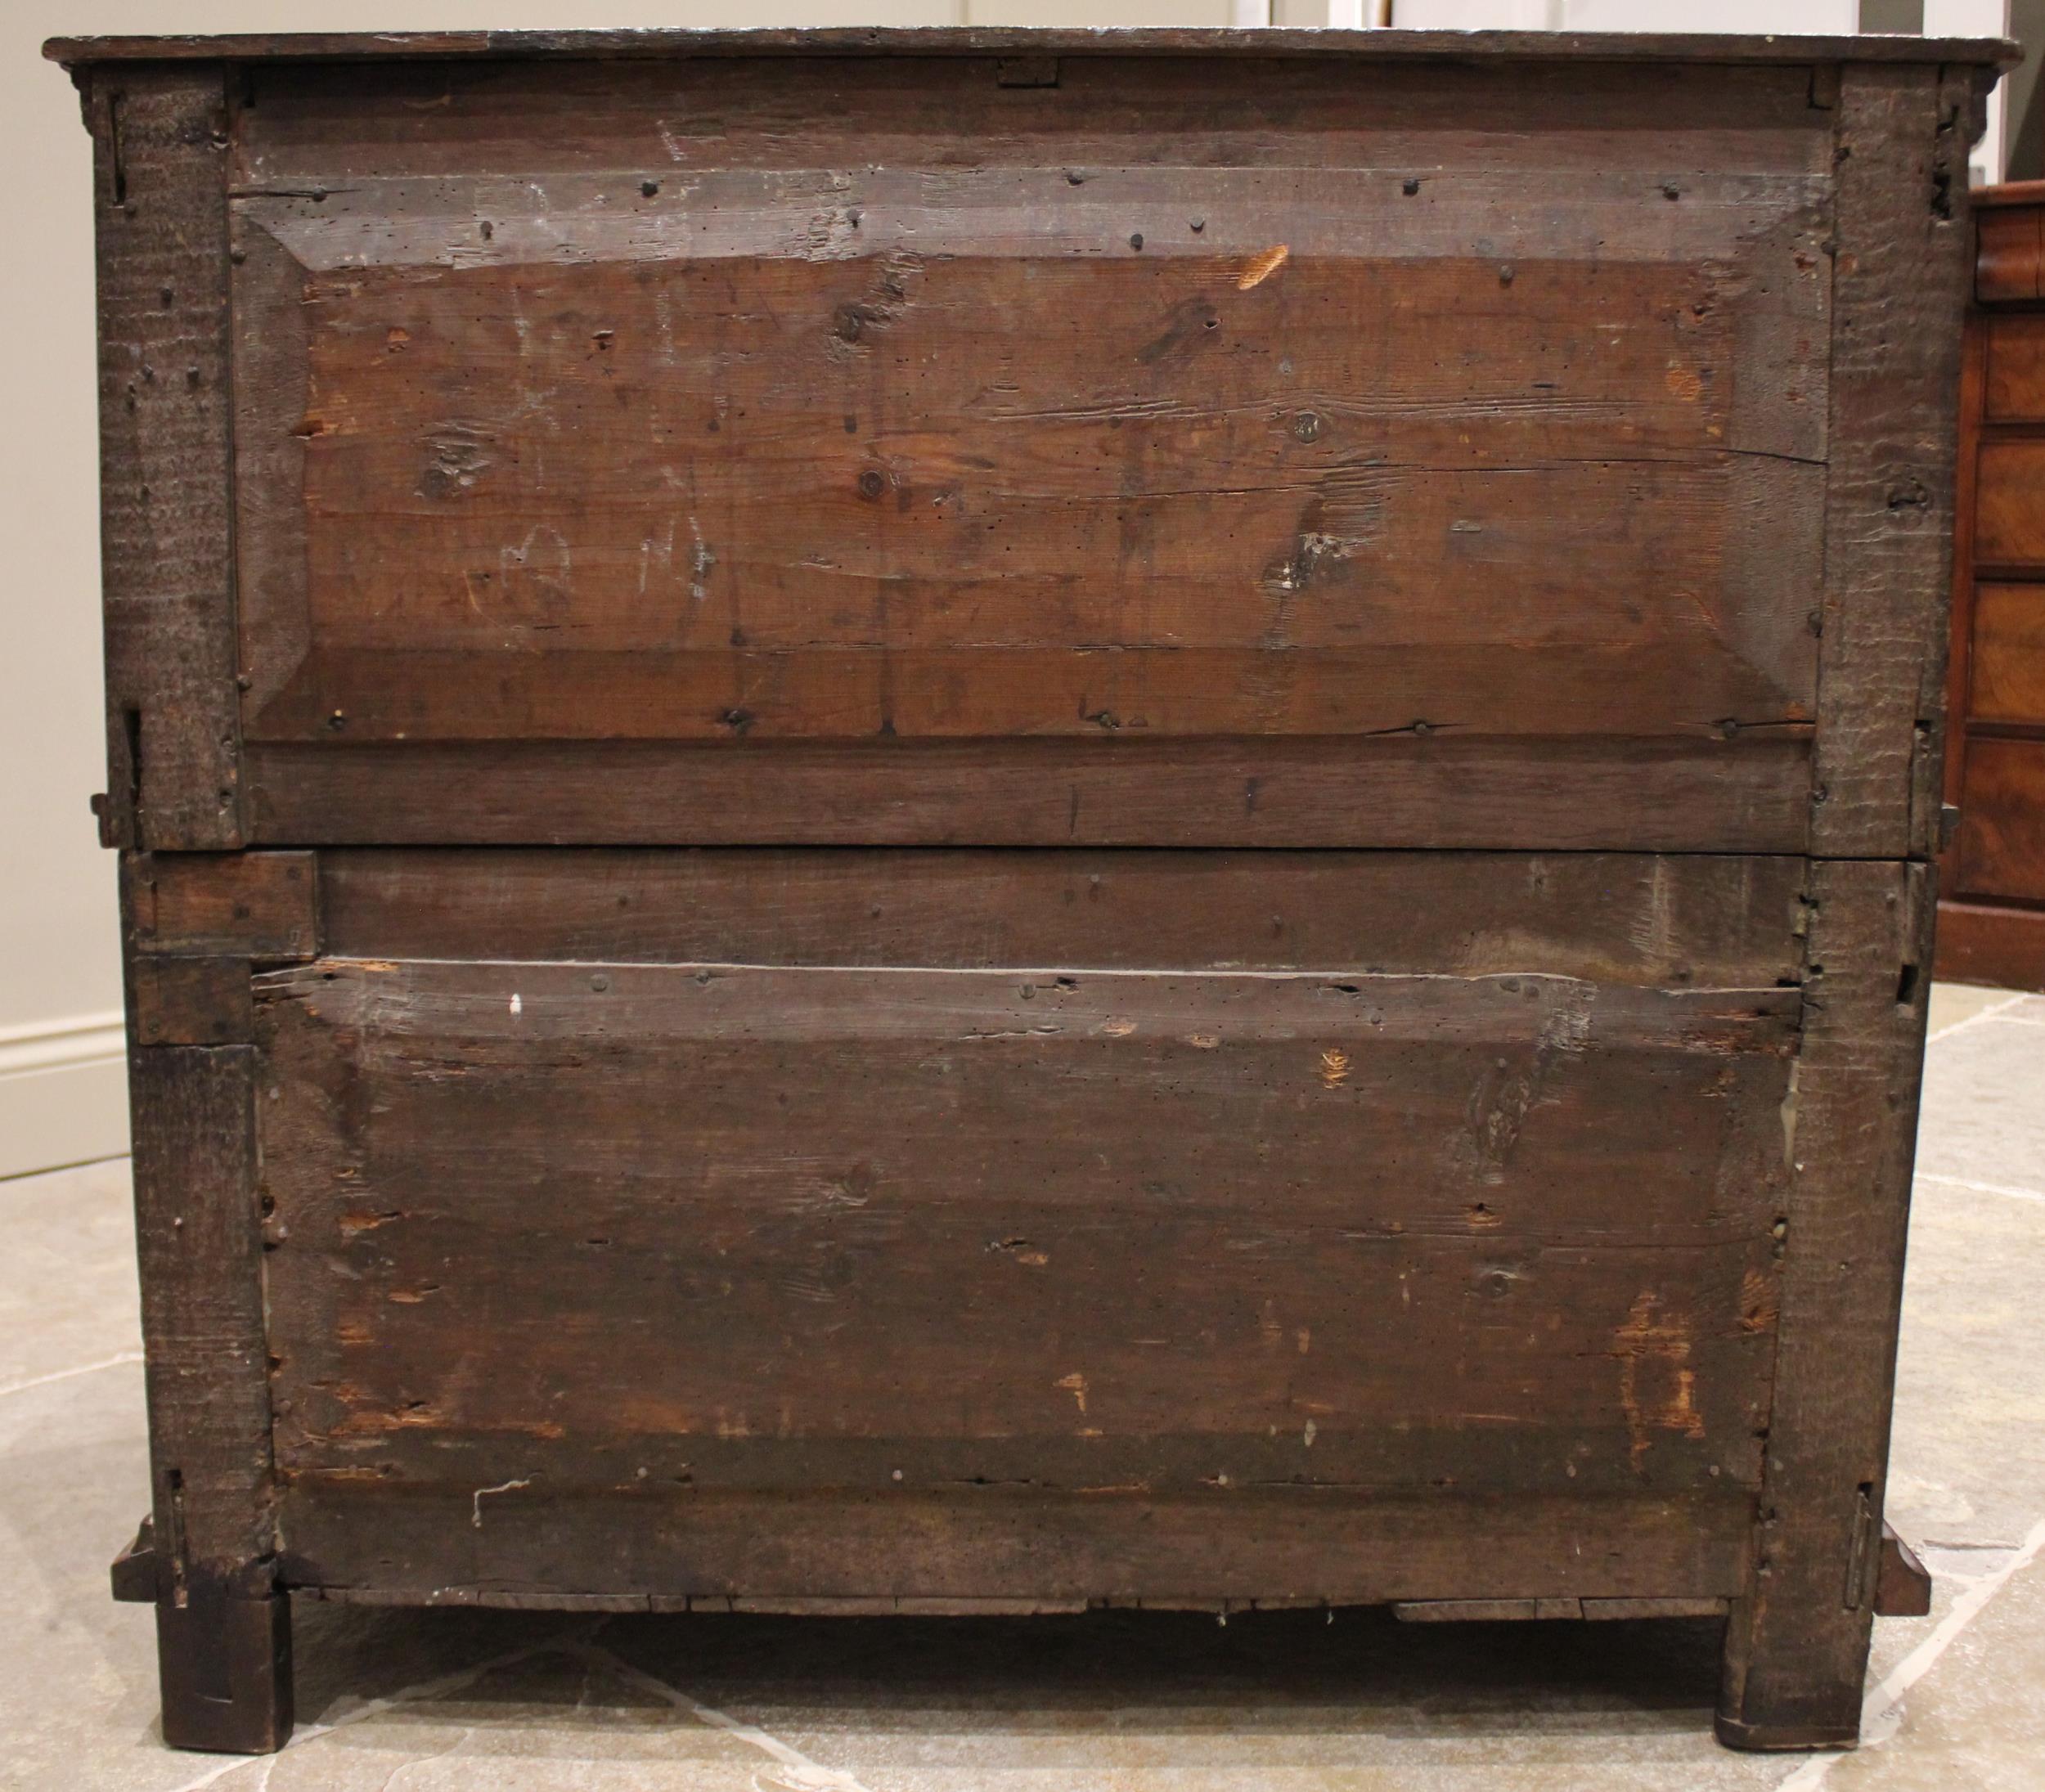 A late 17th/early 18th century two section oak chest of drawers, the upper section with a - Image 2 of 3